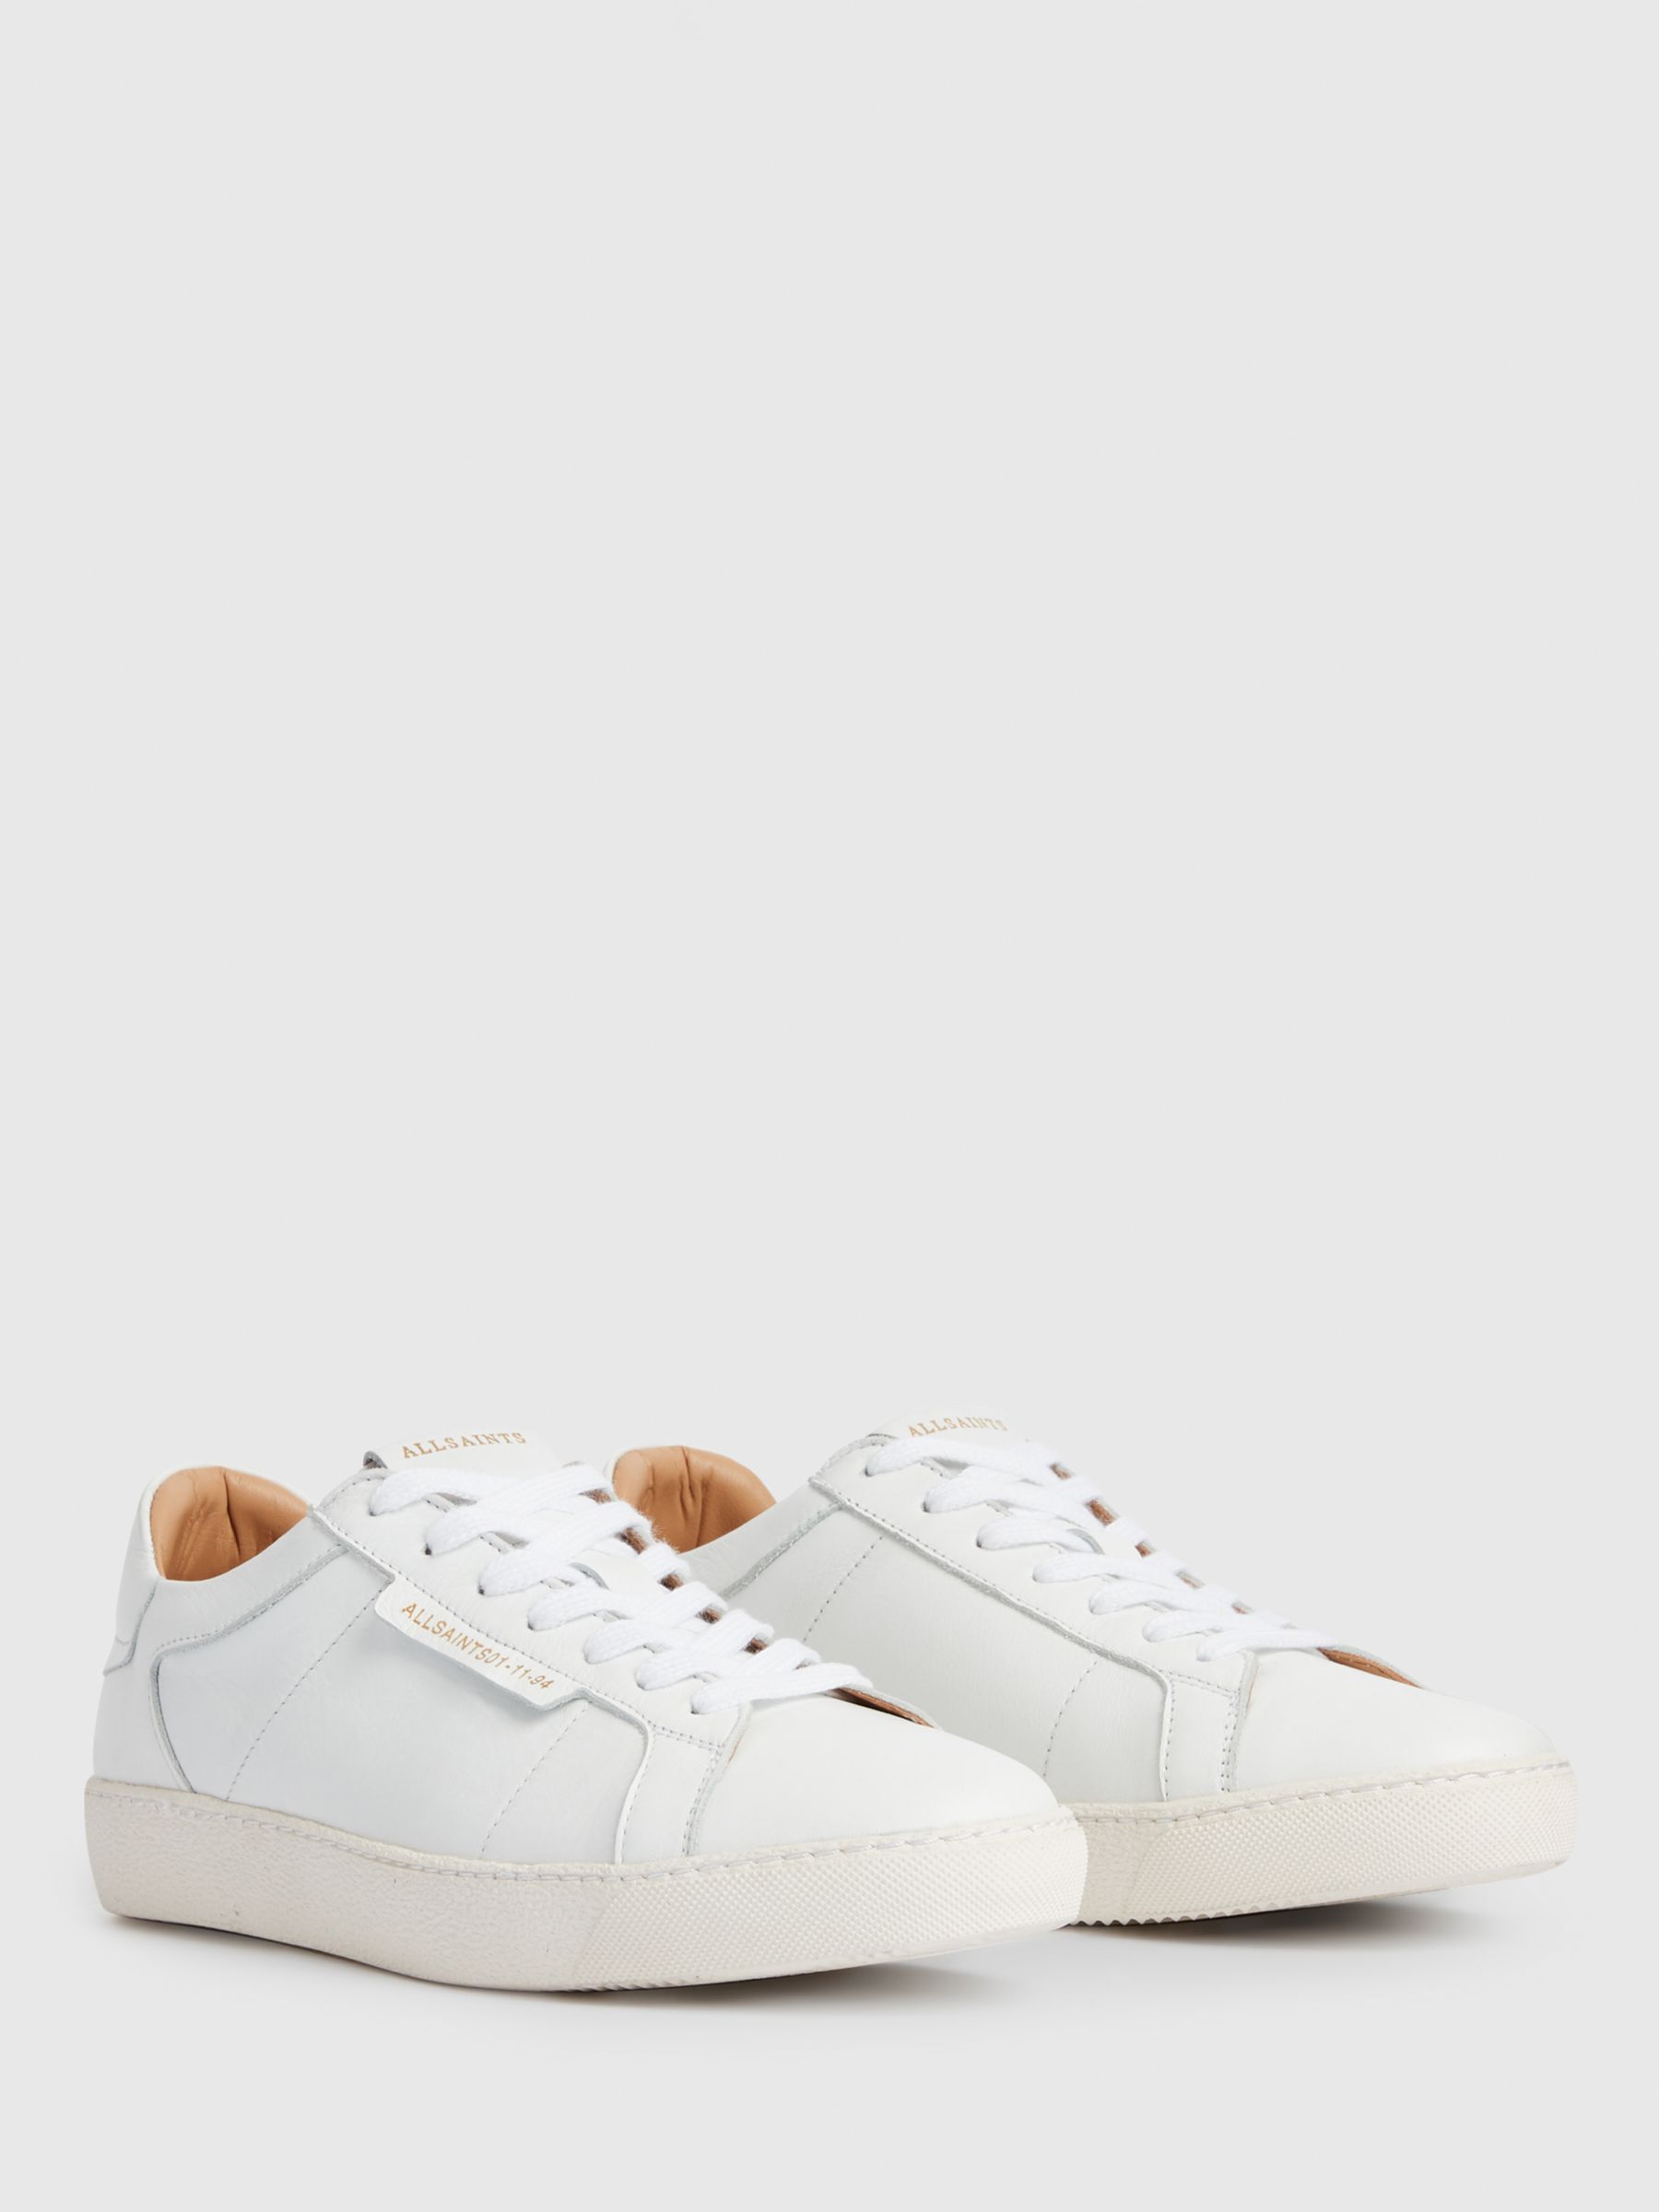 AllSaints Sheer Low Top Leather Trainers, White, 5